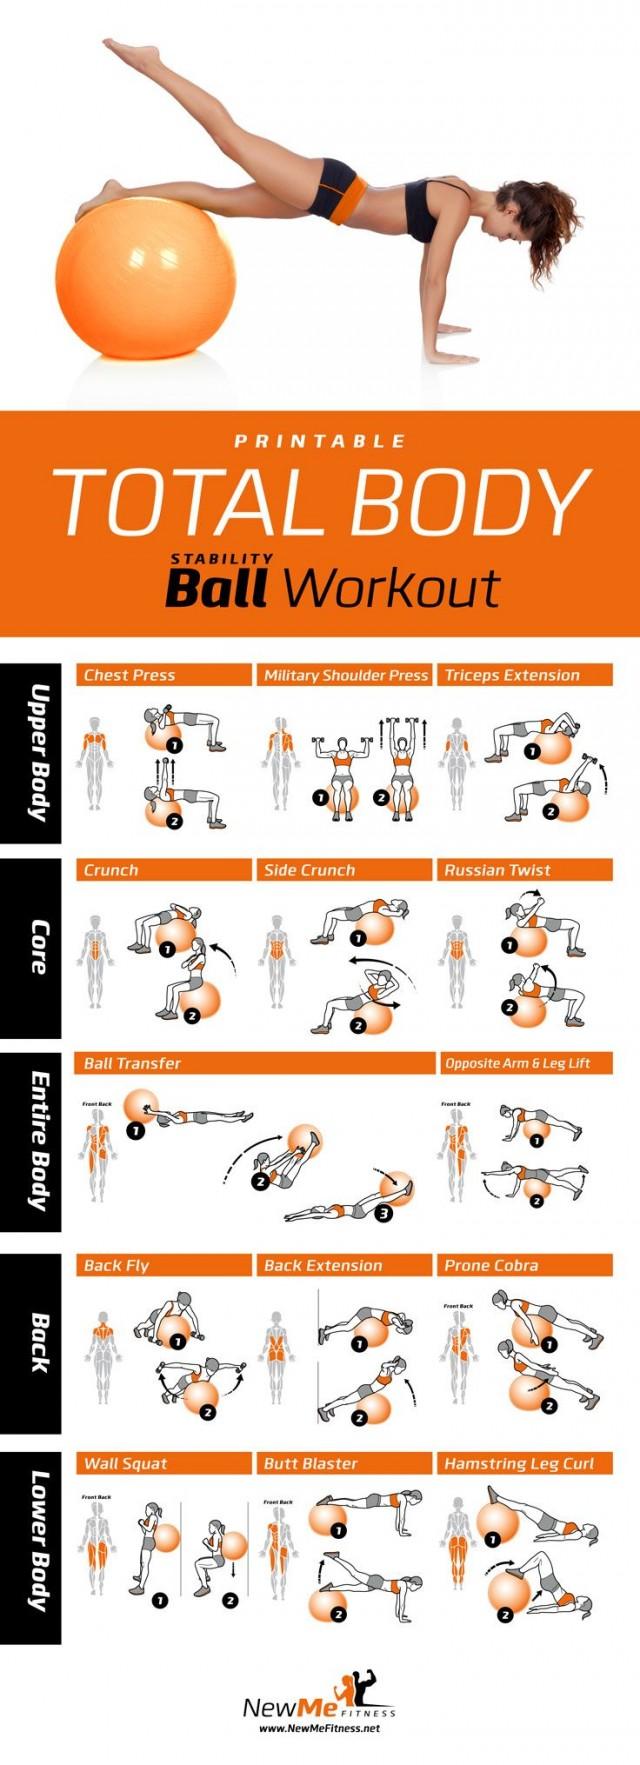 Printable Total Body Stability Ball Workout Poster 2528845 Weddbook